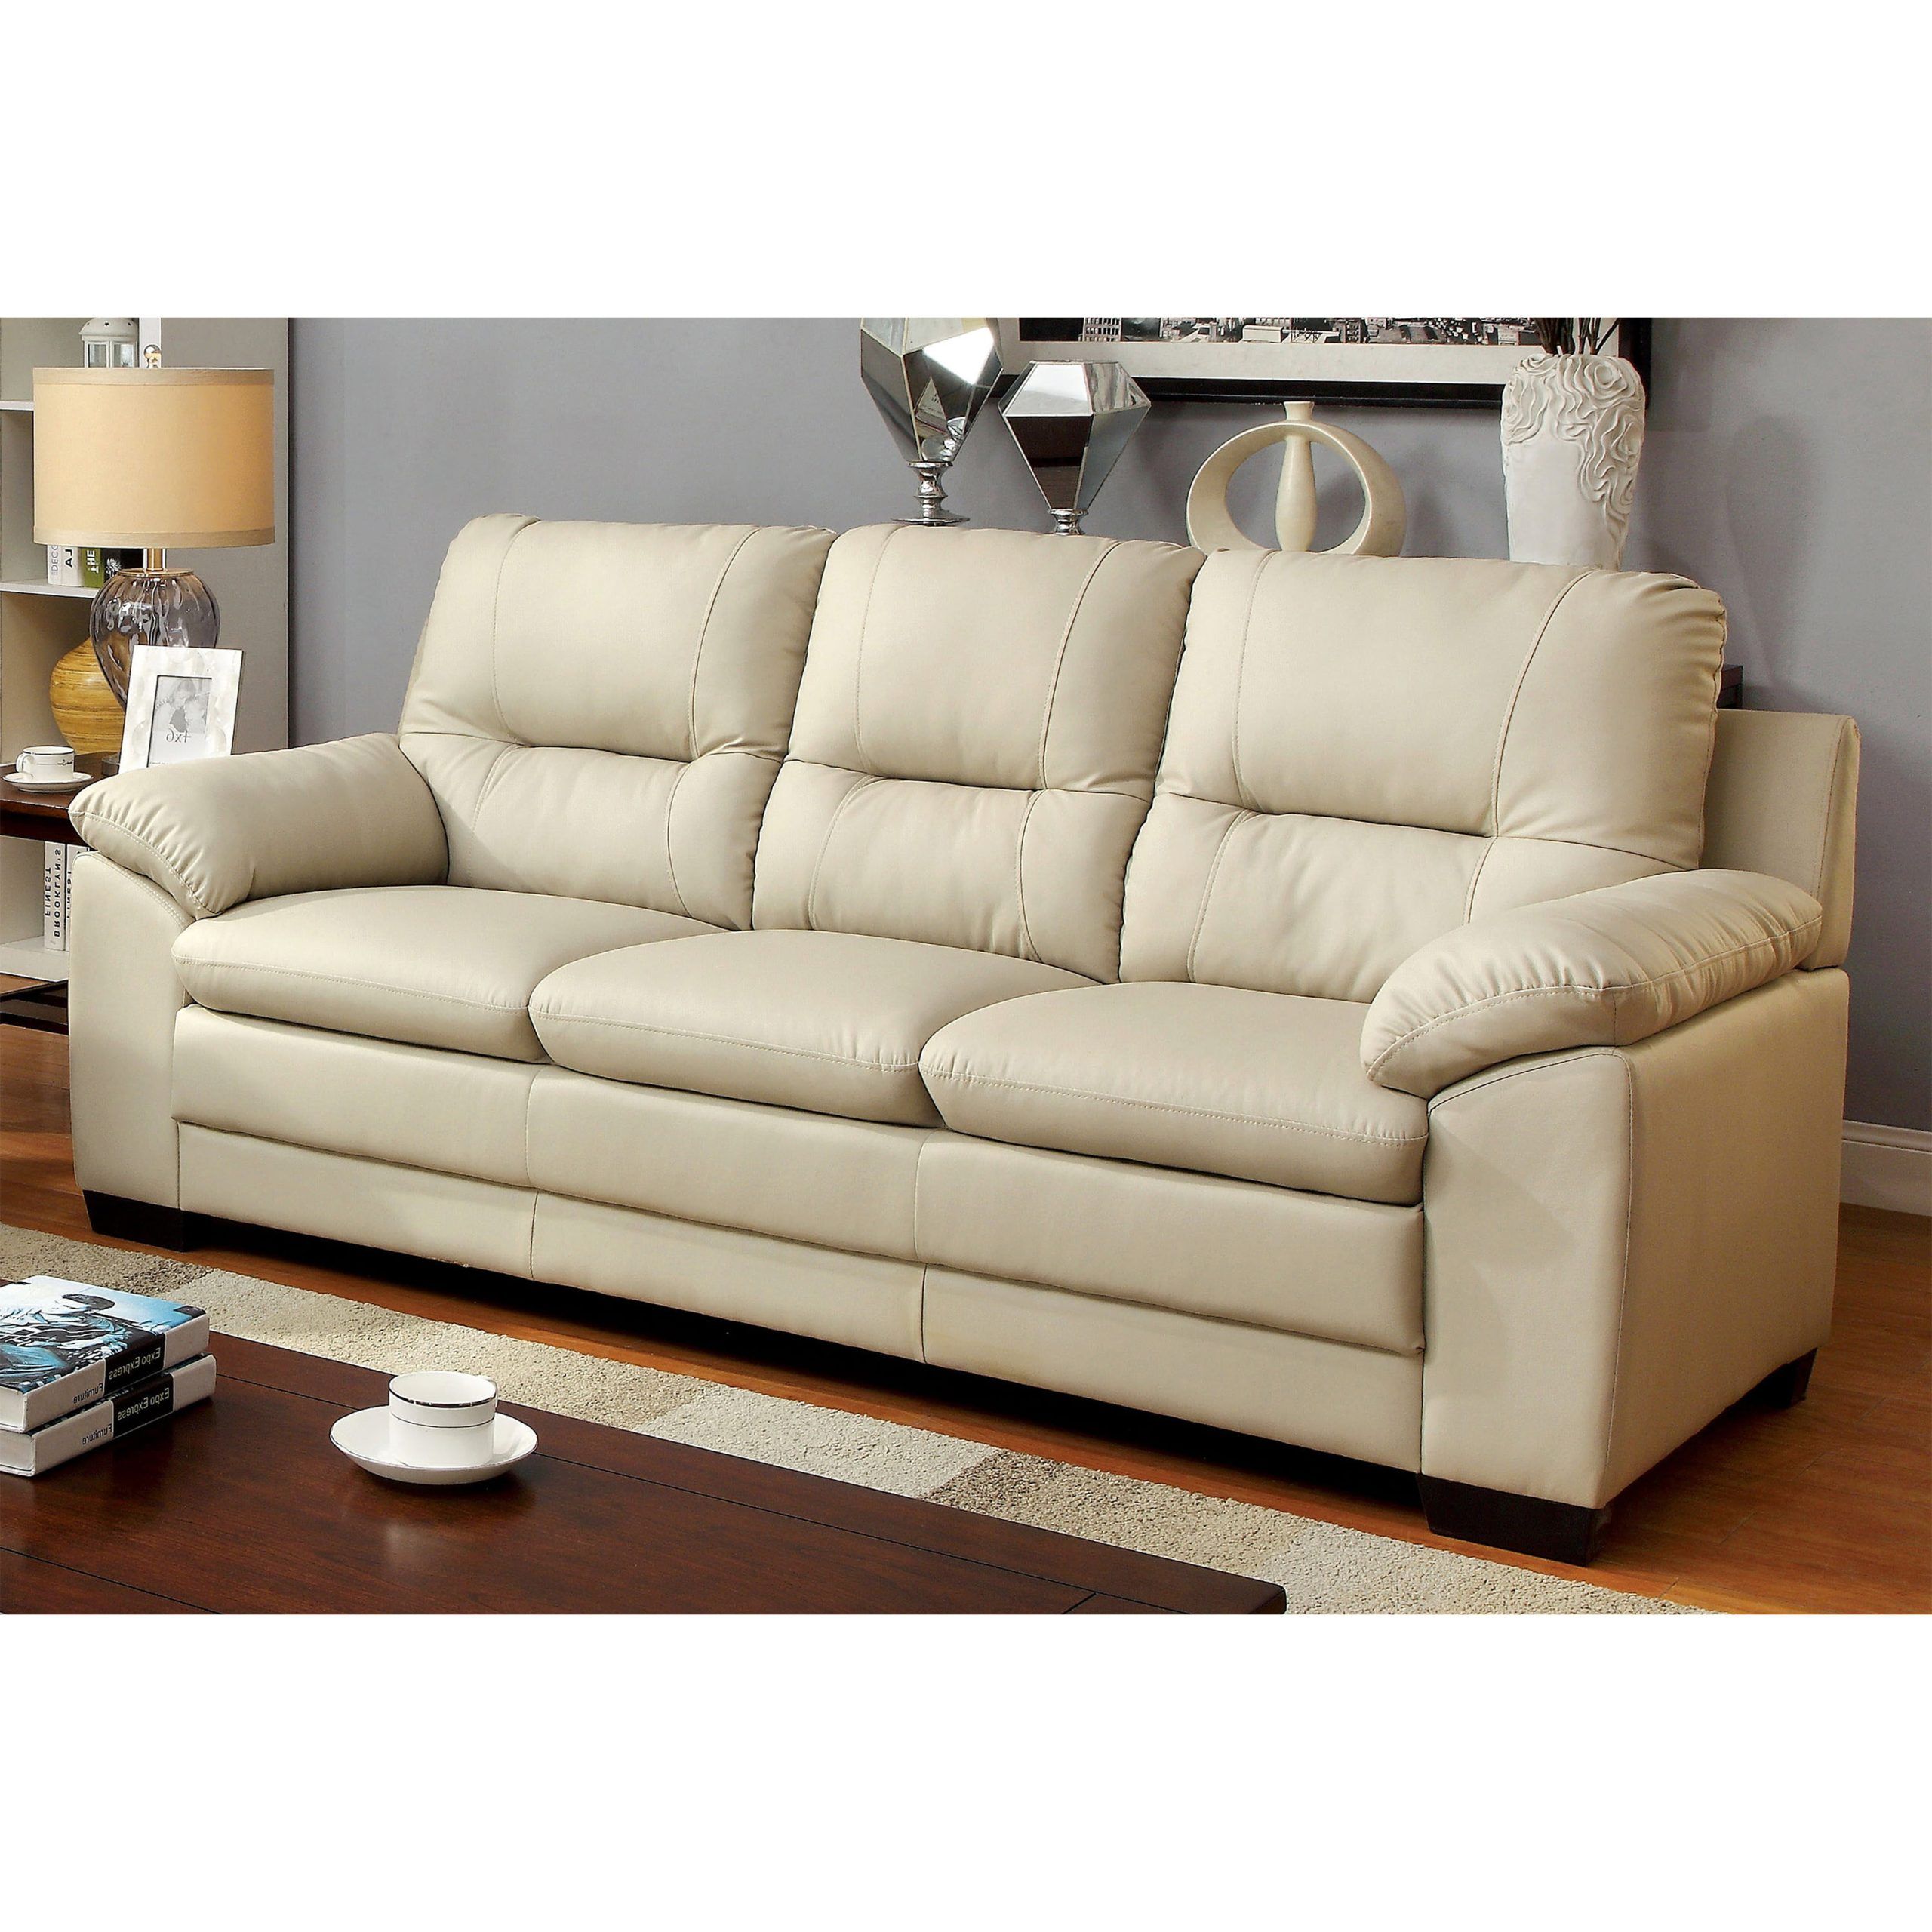 Faux Leather Sofas With Regard To Recent Furniture Of America Contemporary Faux Leather Truman Sofa, Ivory (View 3 of 15)